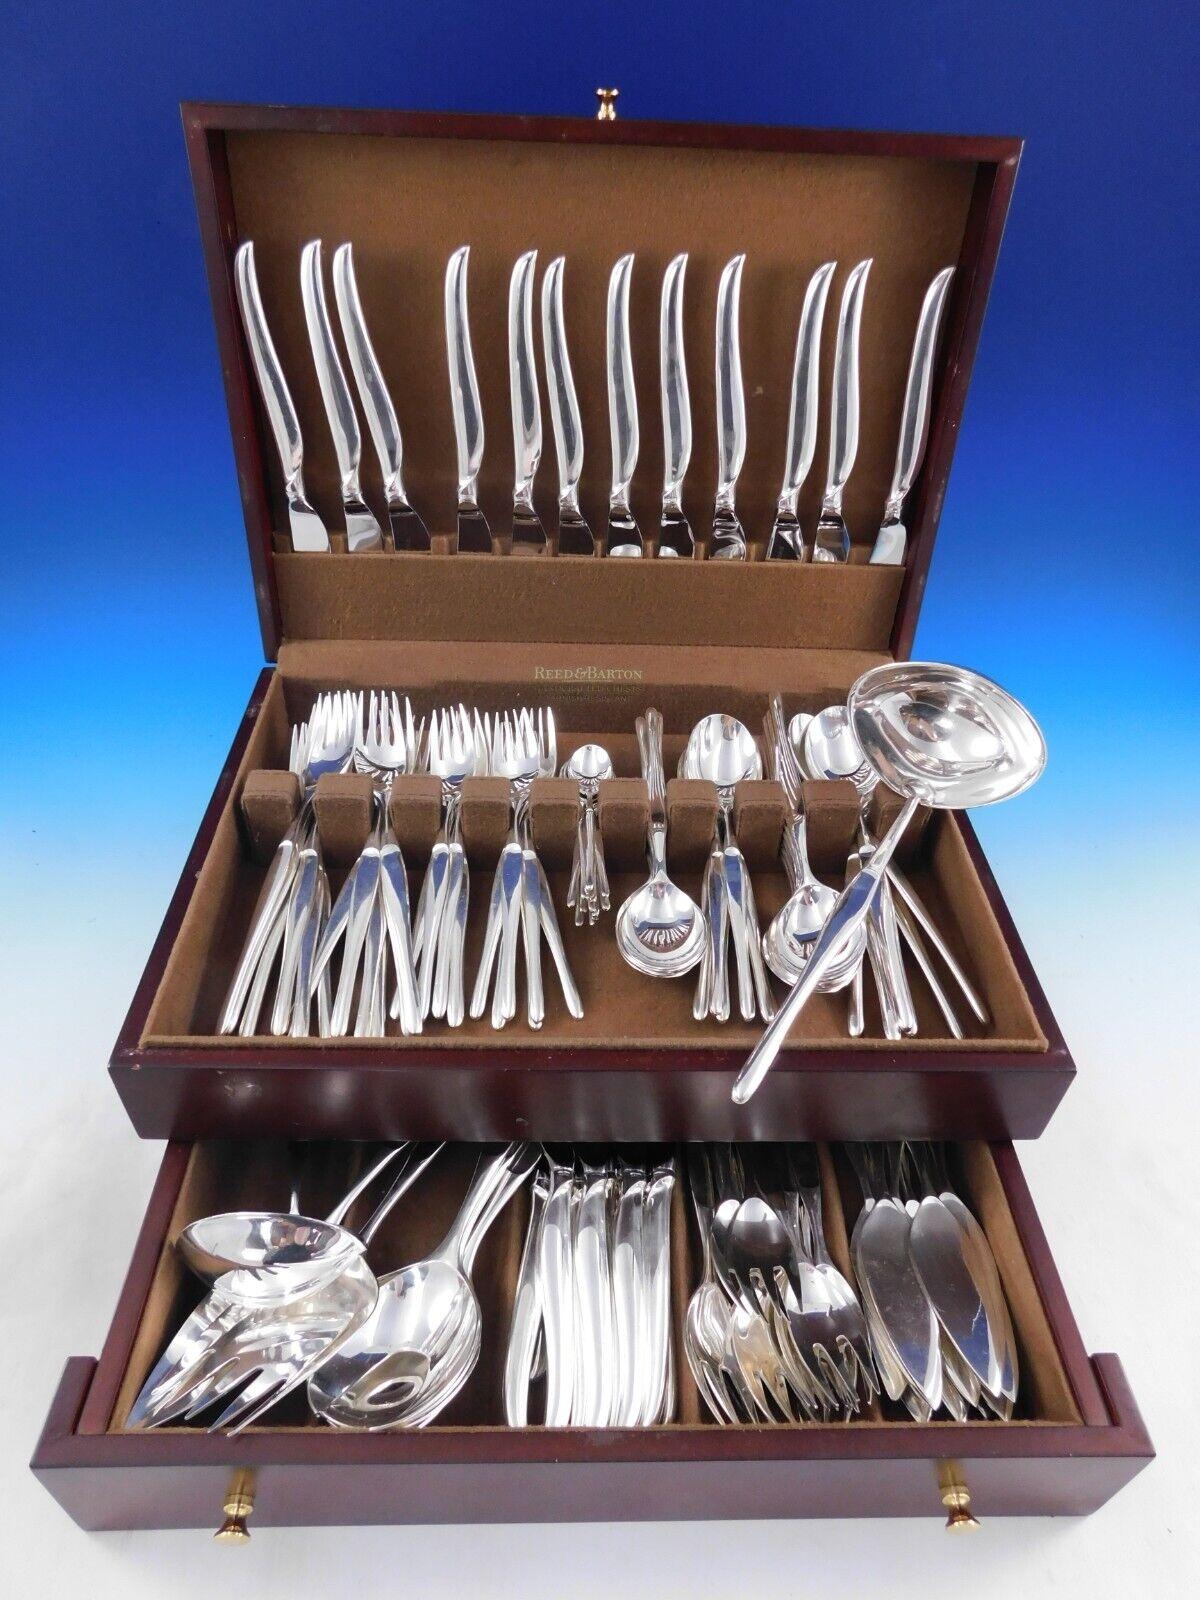 With a dedication to perfection and quality, Christofle flatware creations unite craftsmanship and modern technique, resulting in flatware to be handed down through generations. 


Duo aka Silver Wing by Christofle France estate Silverplate Flatware